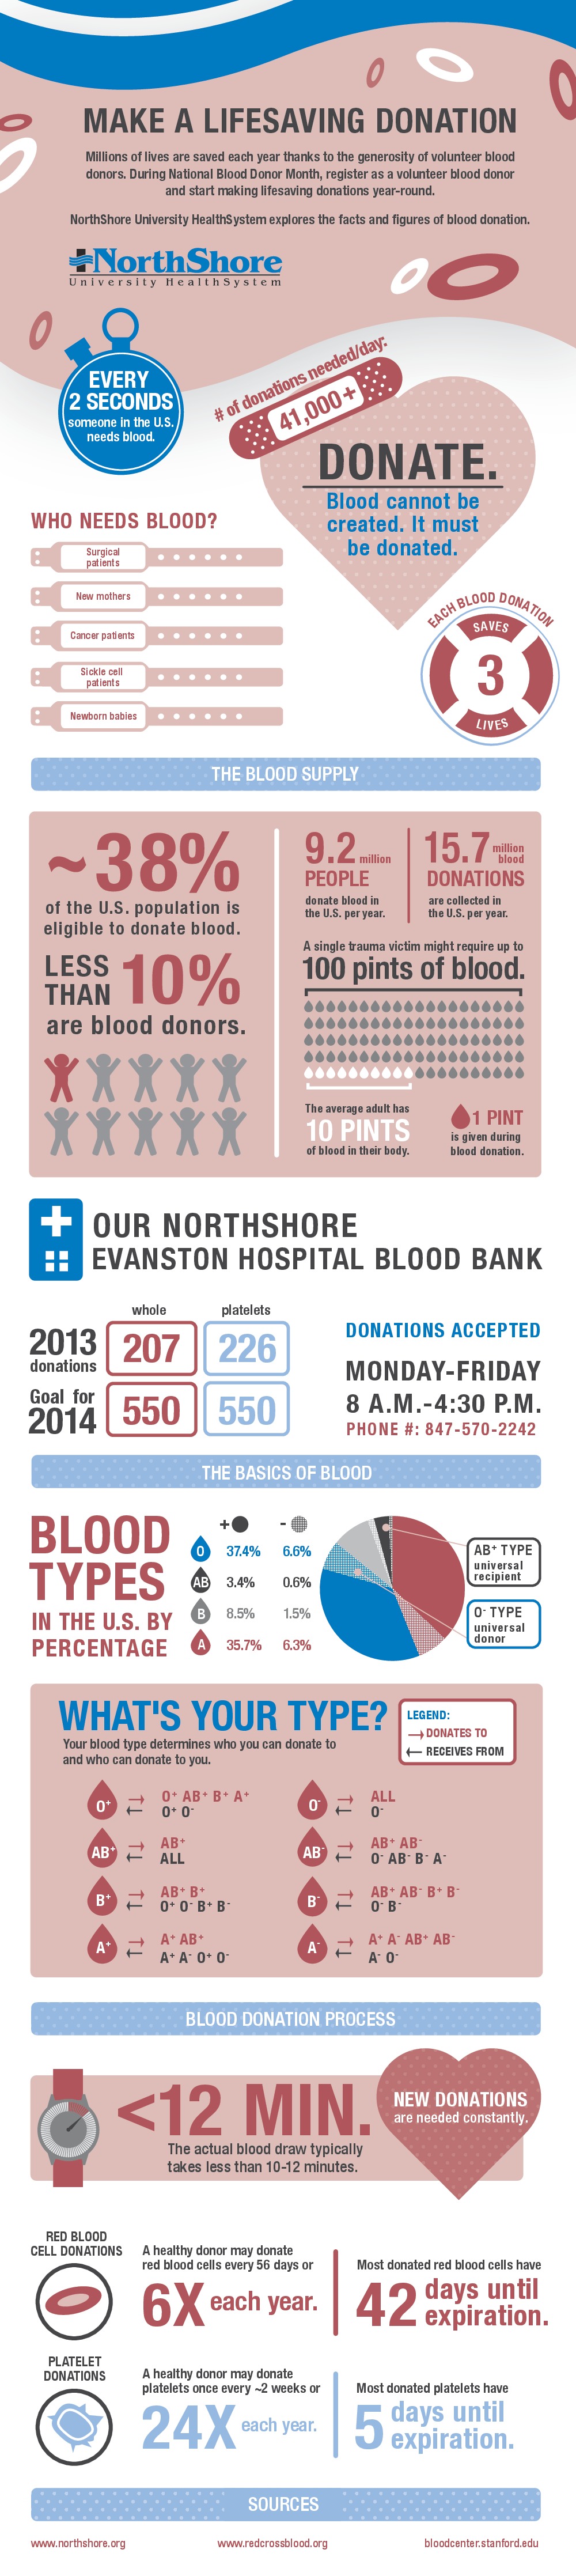 It's a Lifesaver: Blood Donation Facts & Stats | Visual.ly